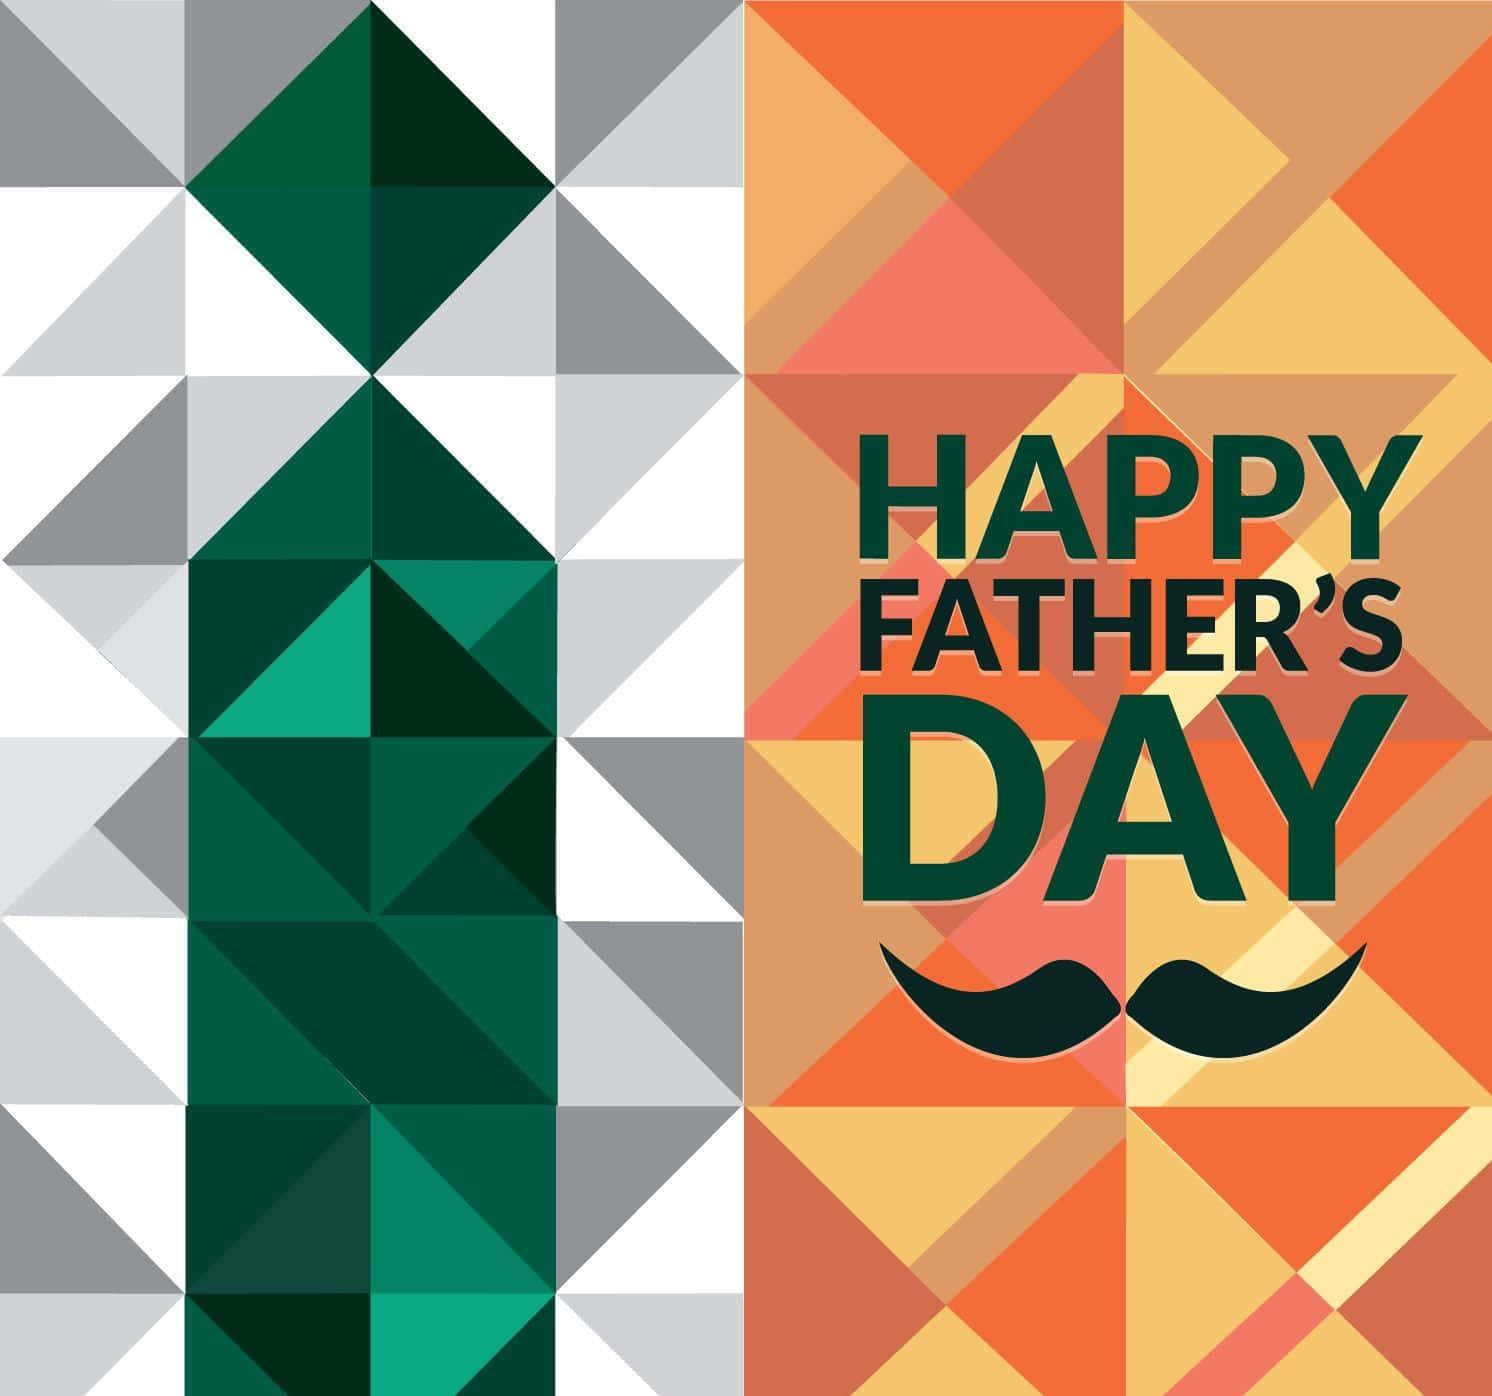 Happy Father's Day Card With A Mustache And Geometric Shapes